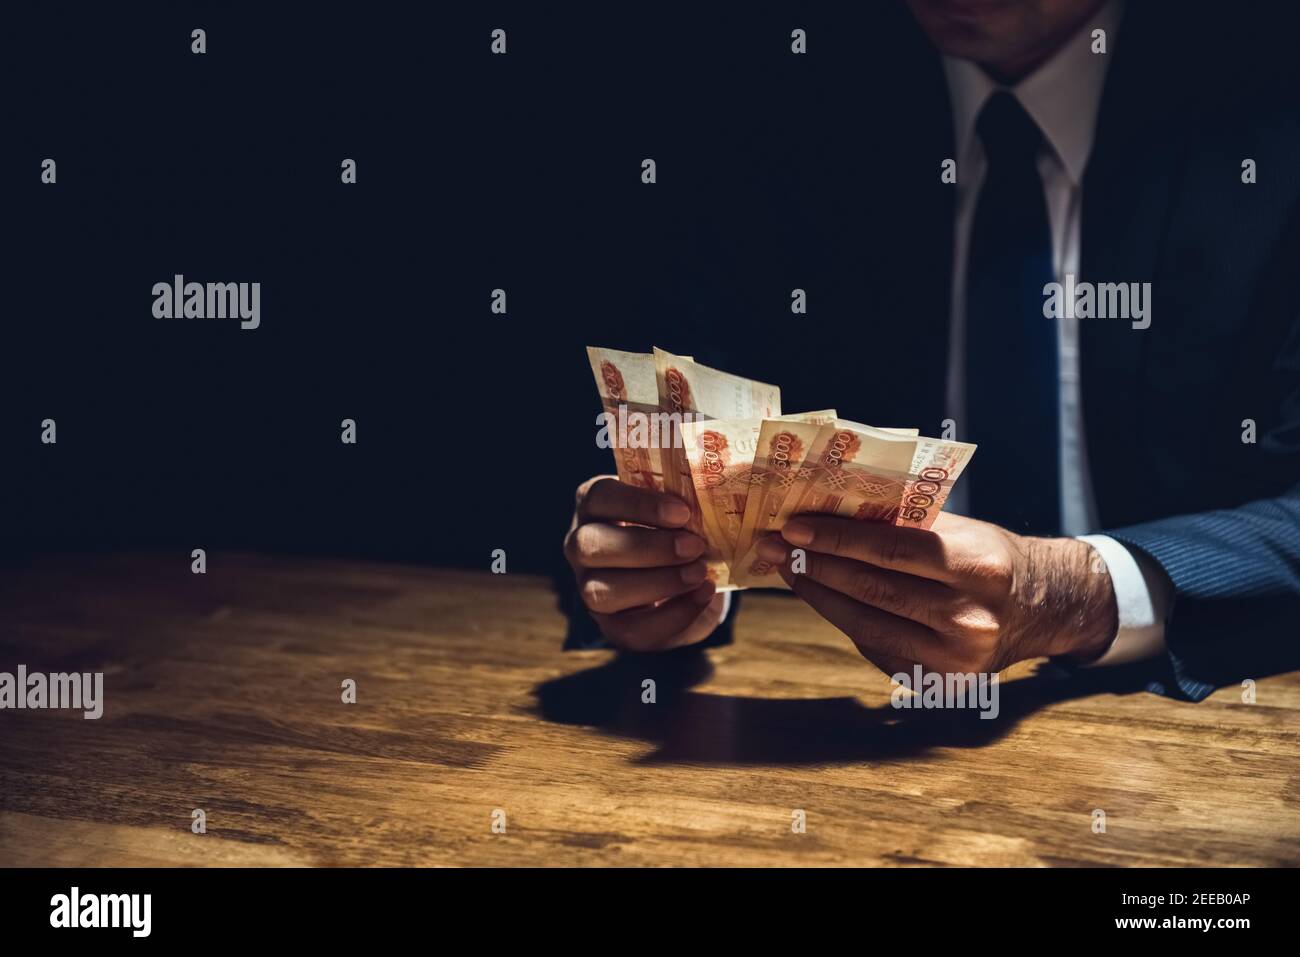 Businessman in the dark room counting money, Russian ruble currency Stock Photo